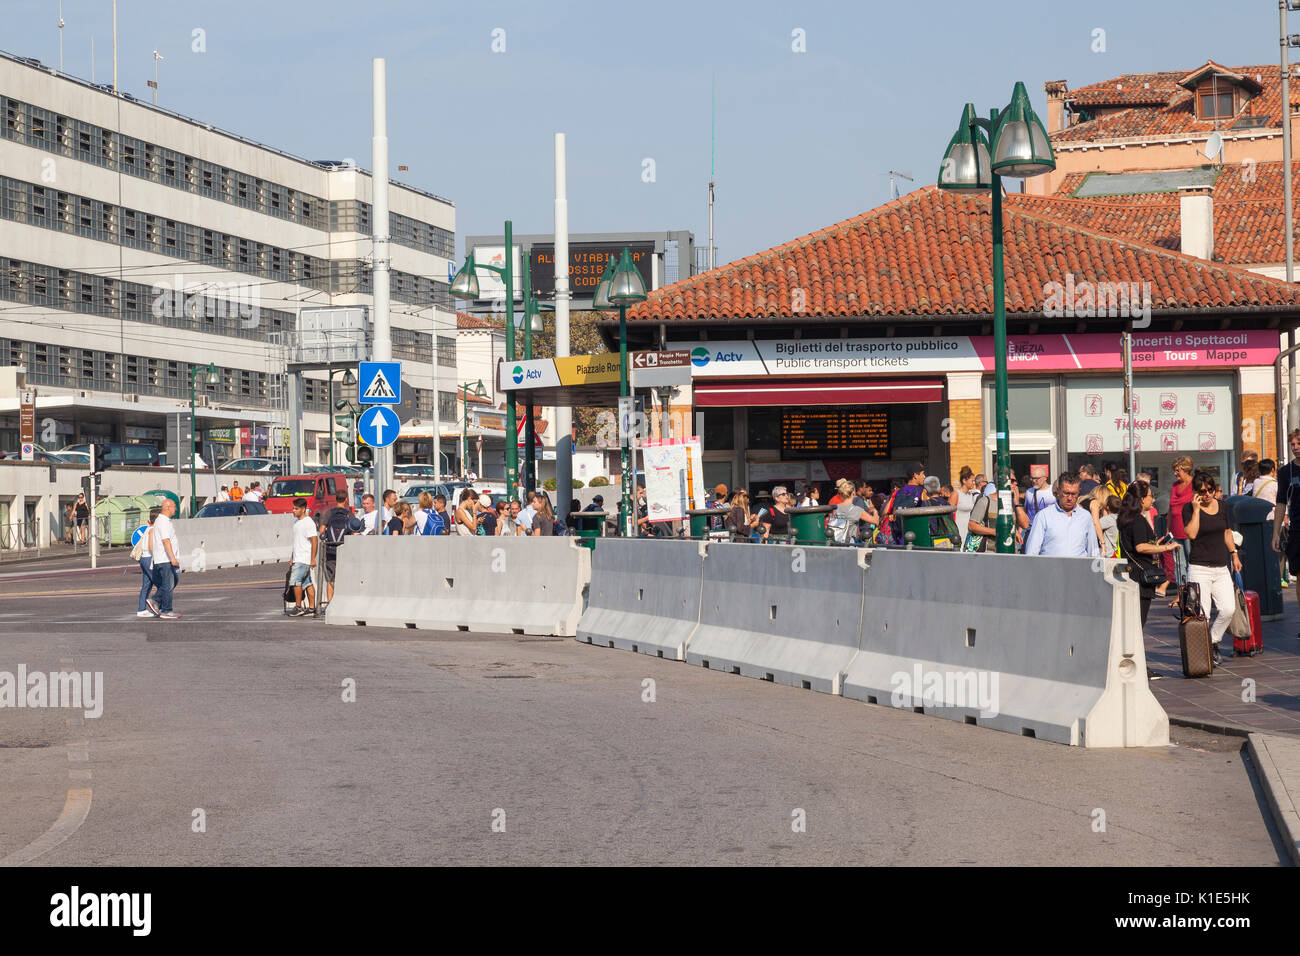 Venice, Italy. 26th Aug, 2017. Anti-terror preparations for the 2017 Venice Film Festival due to start on the 30 August. Overnight the first of the concrete barriers have been installed in the Piazzale Roma to protect pedestrians and the tram lines from vehicular terror attacks. Tourists behind the barrier at the entrance to Ponte della Liberte with the transport ticket office behind. Credit: Mary Clarke/Alamy Live News Stock Photo